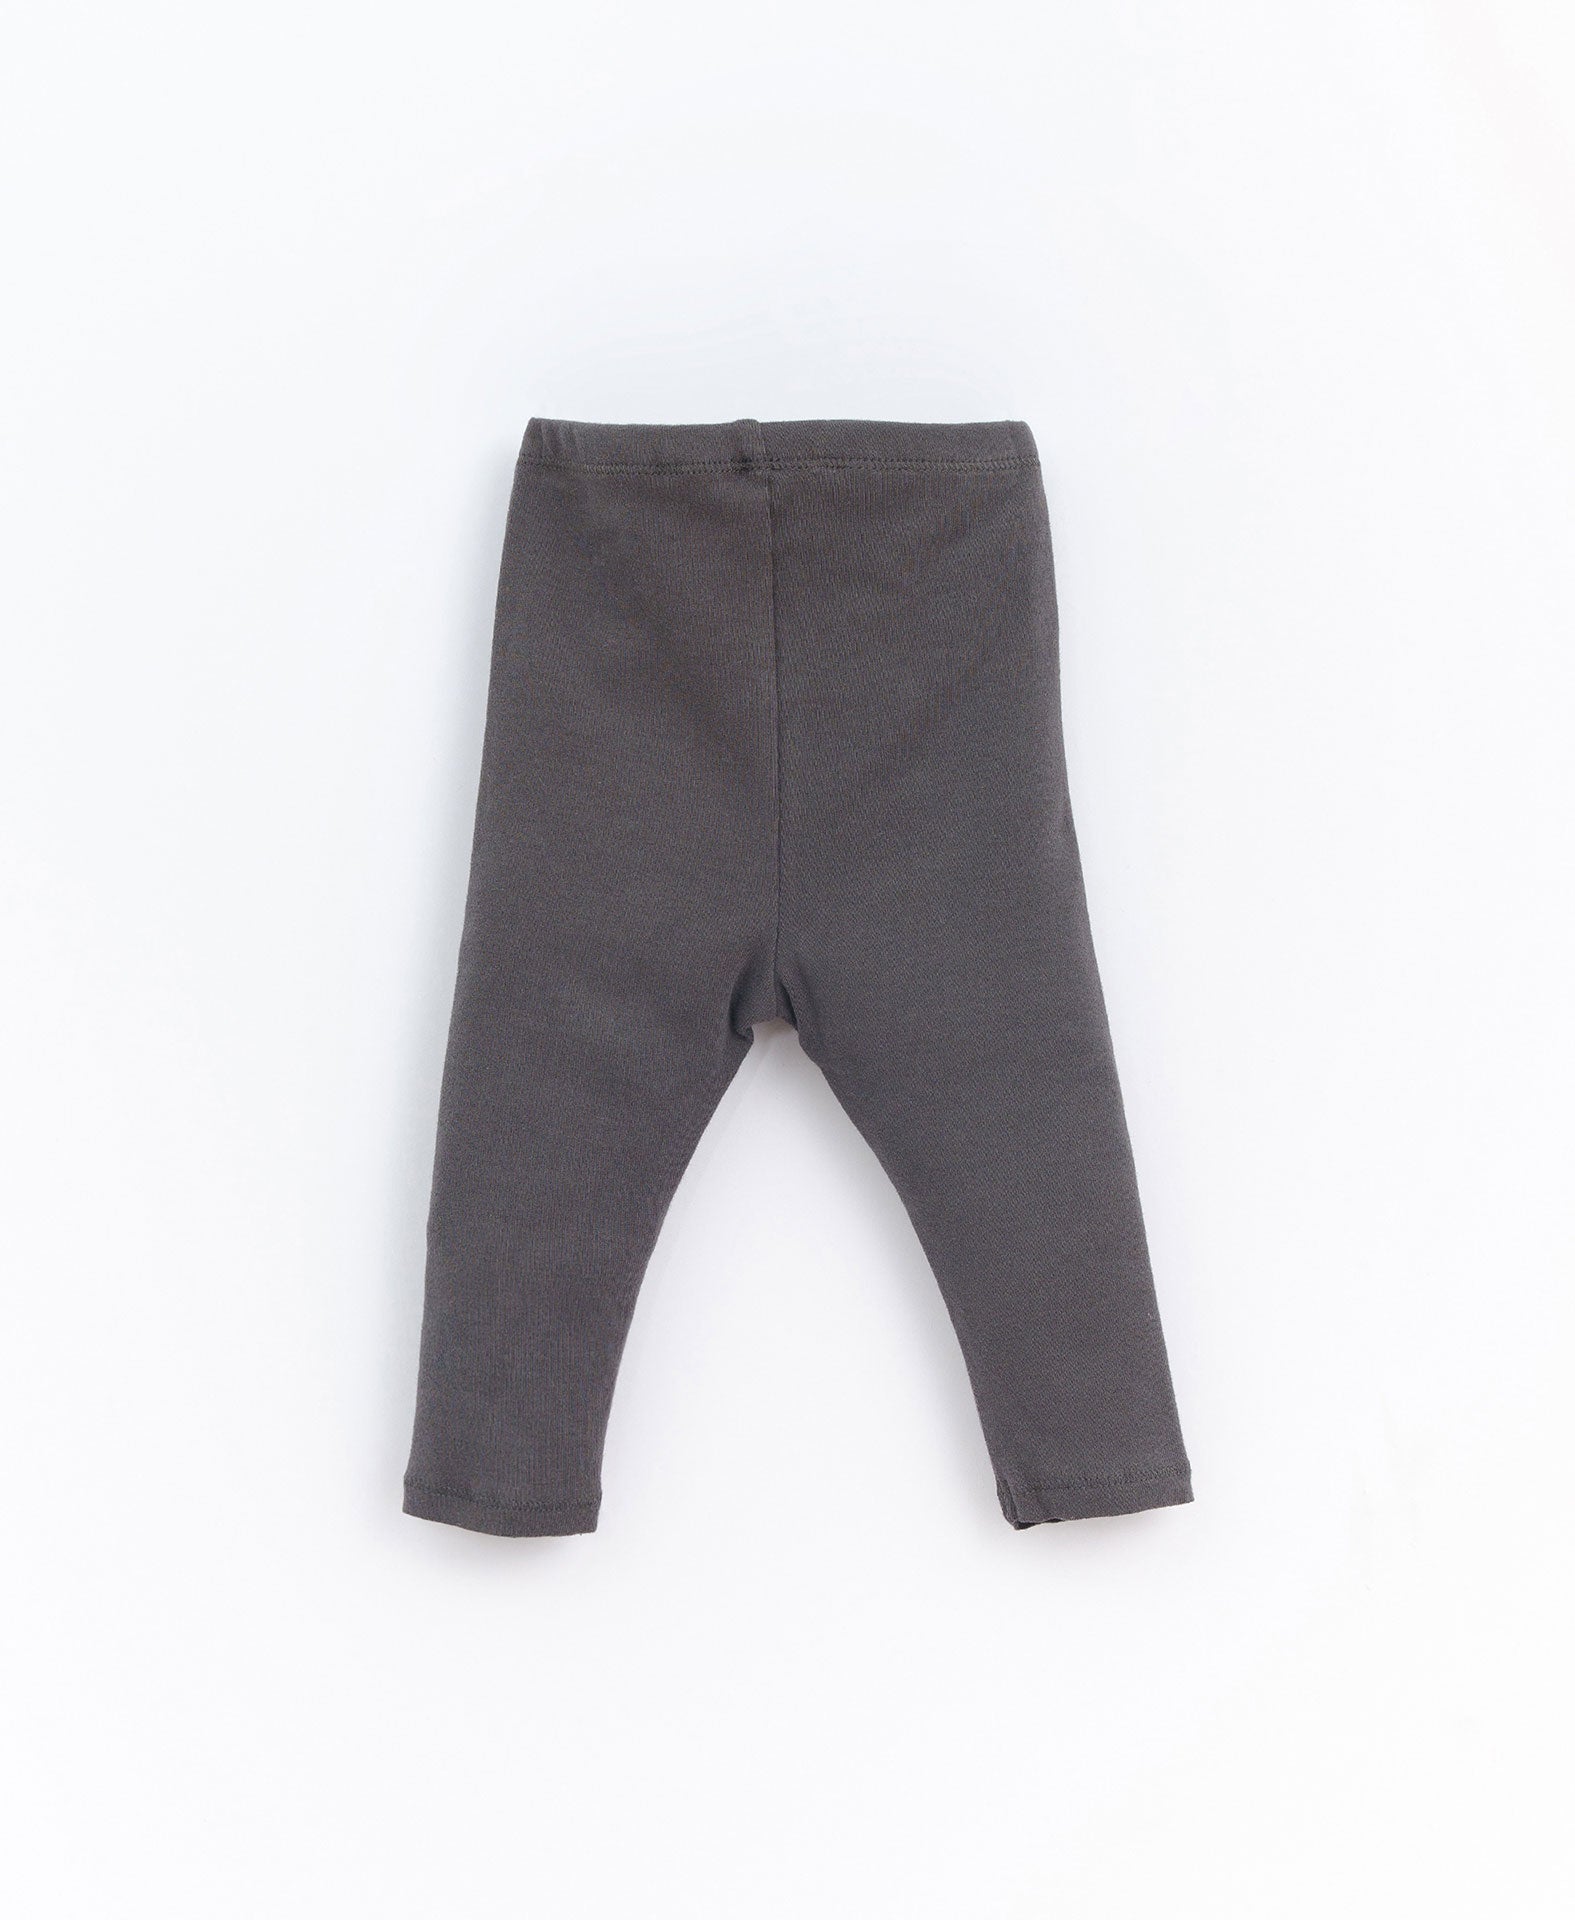 Ribbed Leggings - Chia Children's Clothing Play Up 